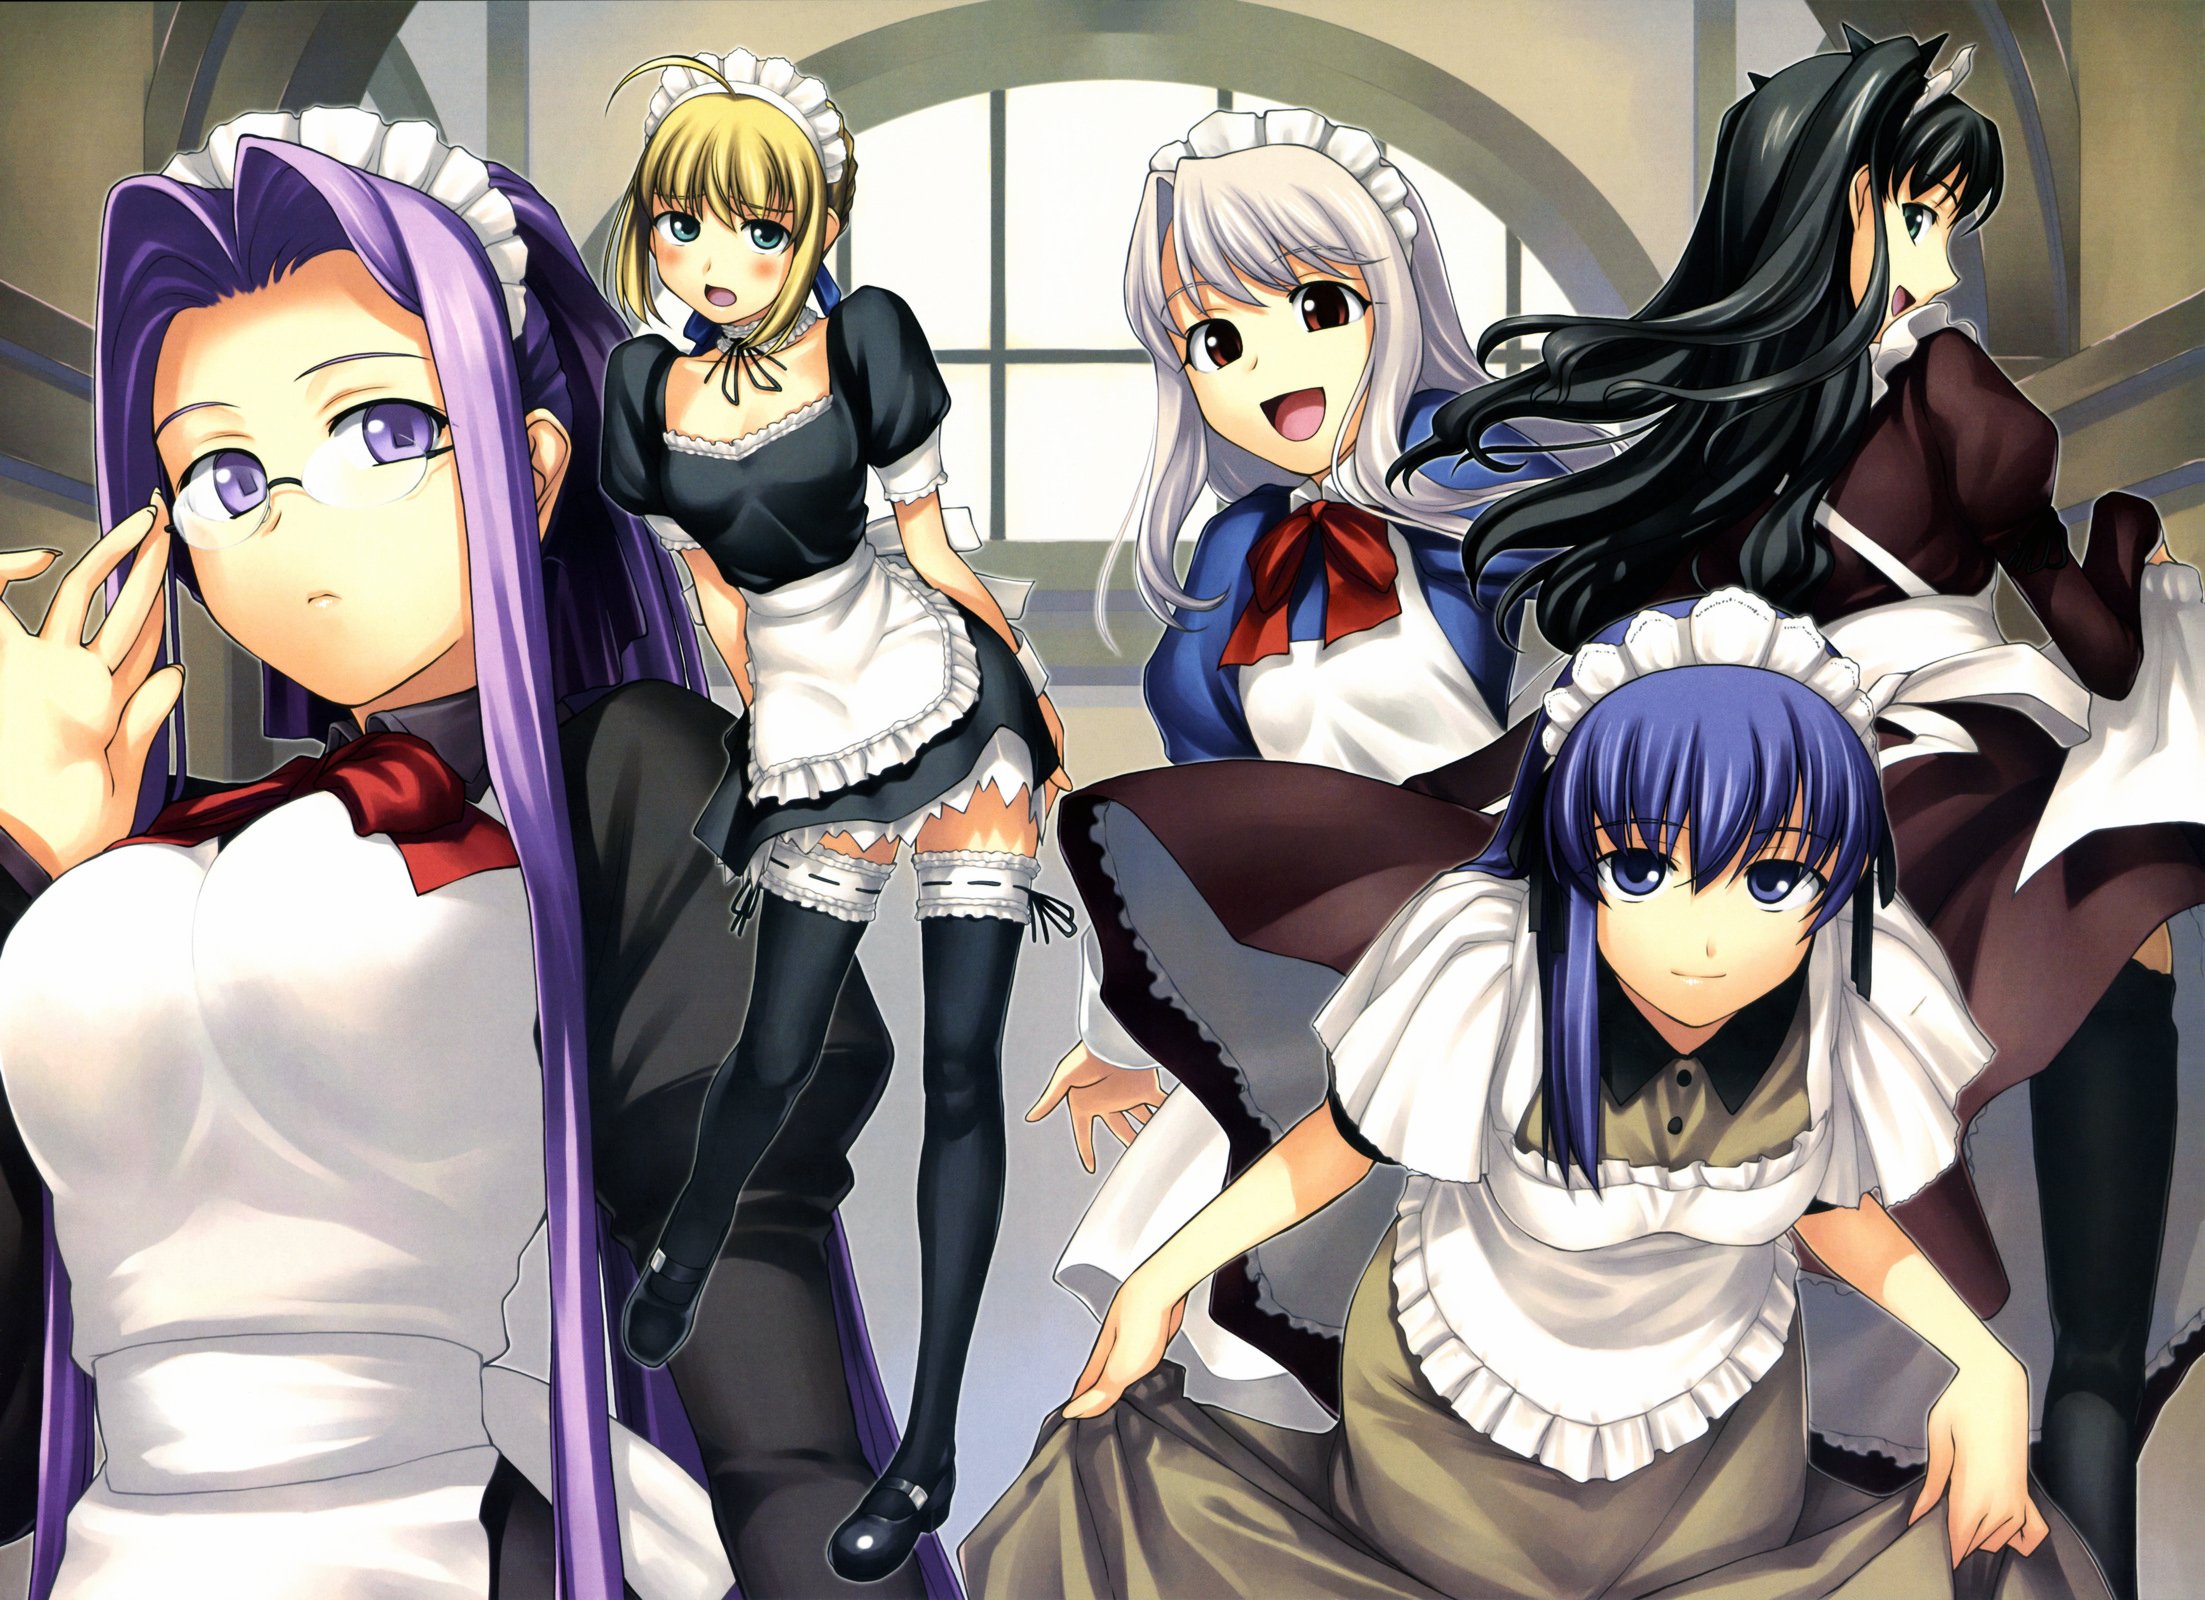 Fate series characters Illyasviel, Saber, Rin, Sakura, and Rider team up in this HD desktop wallpaper.